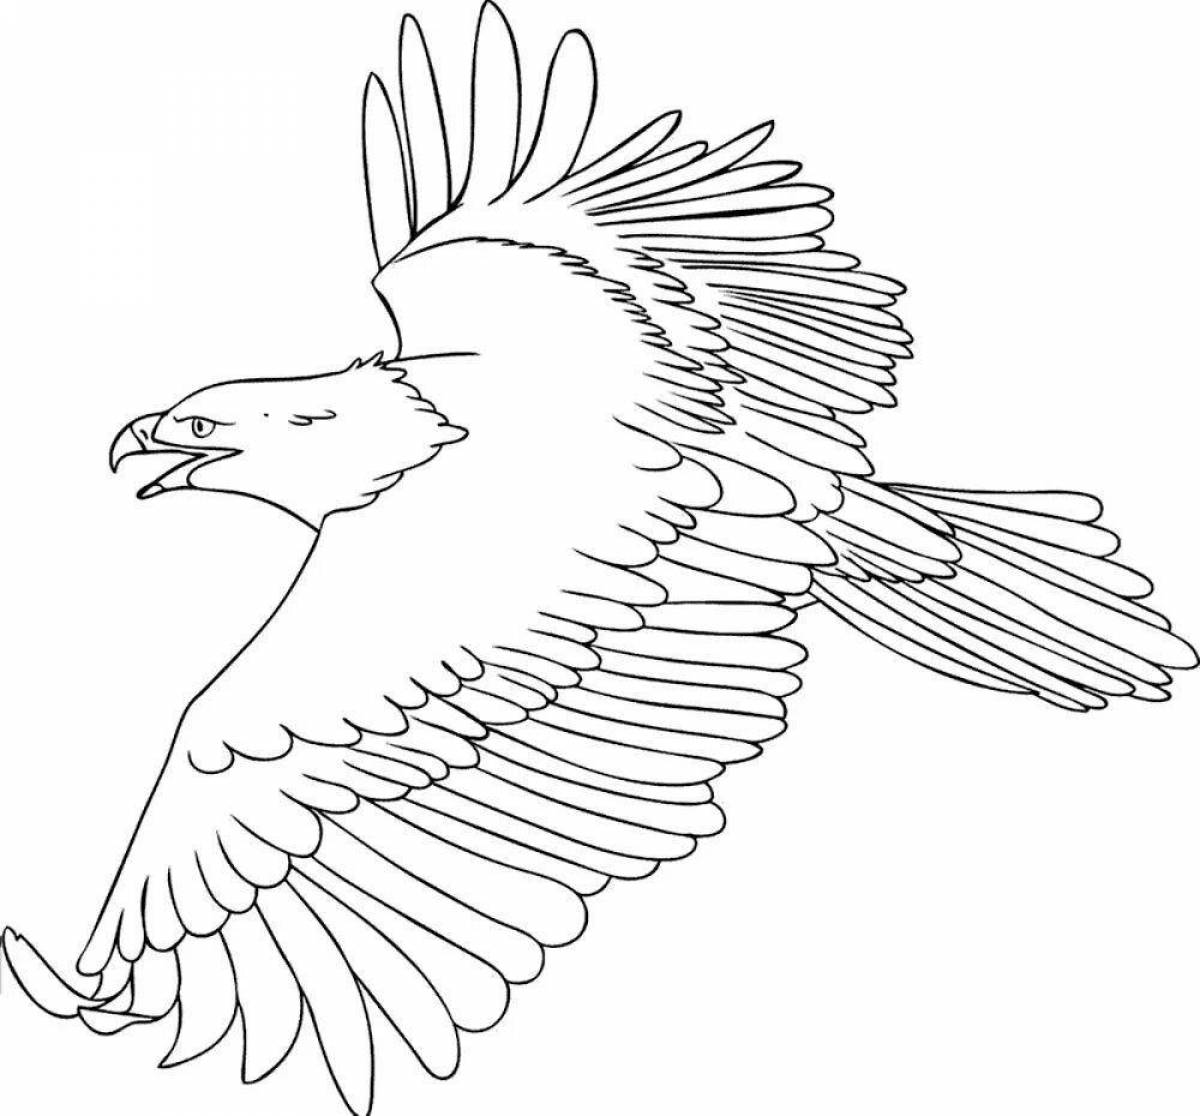 Awesome eagle coloring page